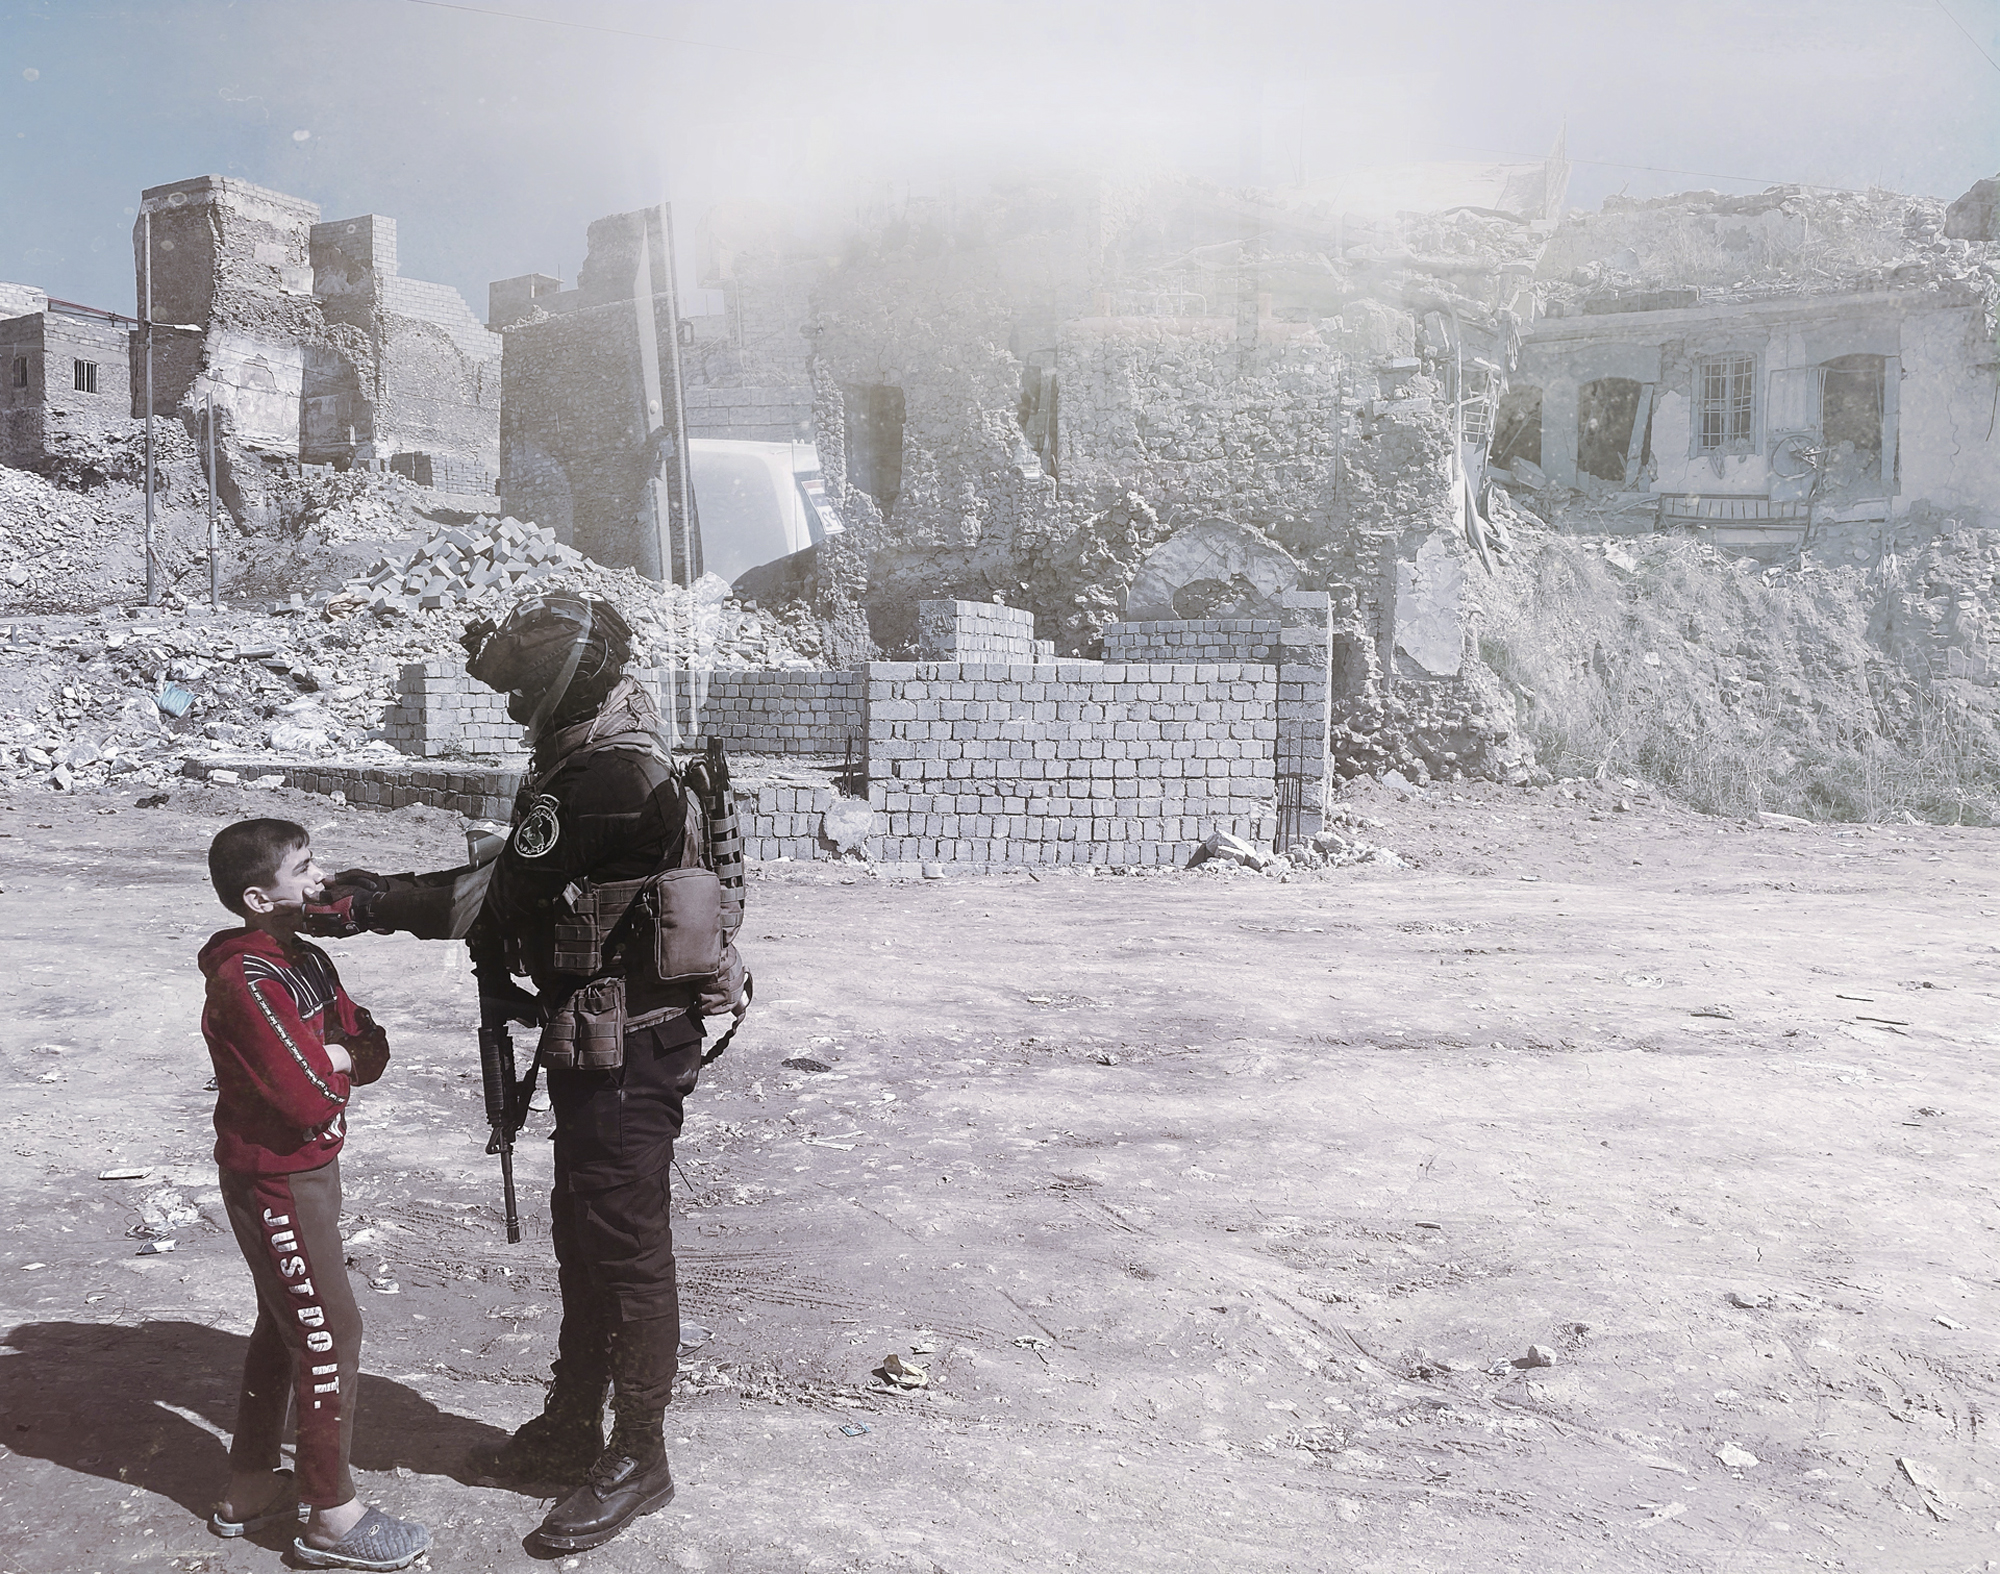 A soldier talking to a young boy in front of ruins